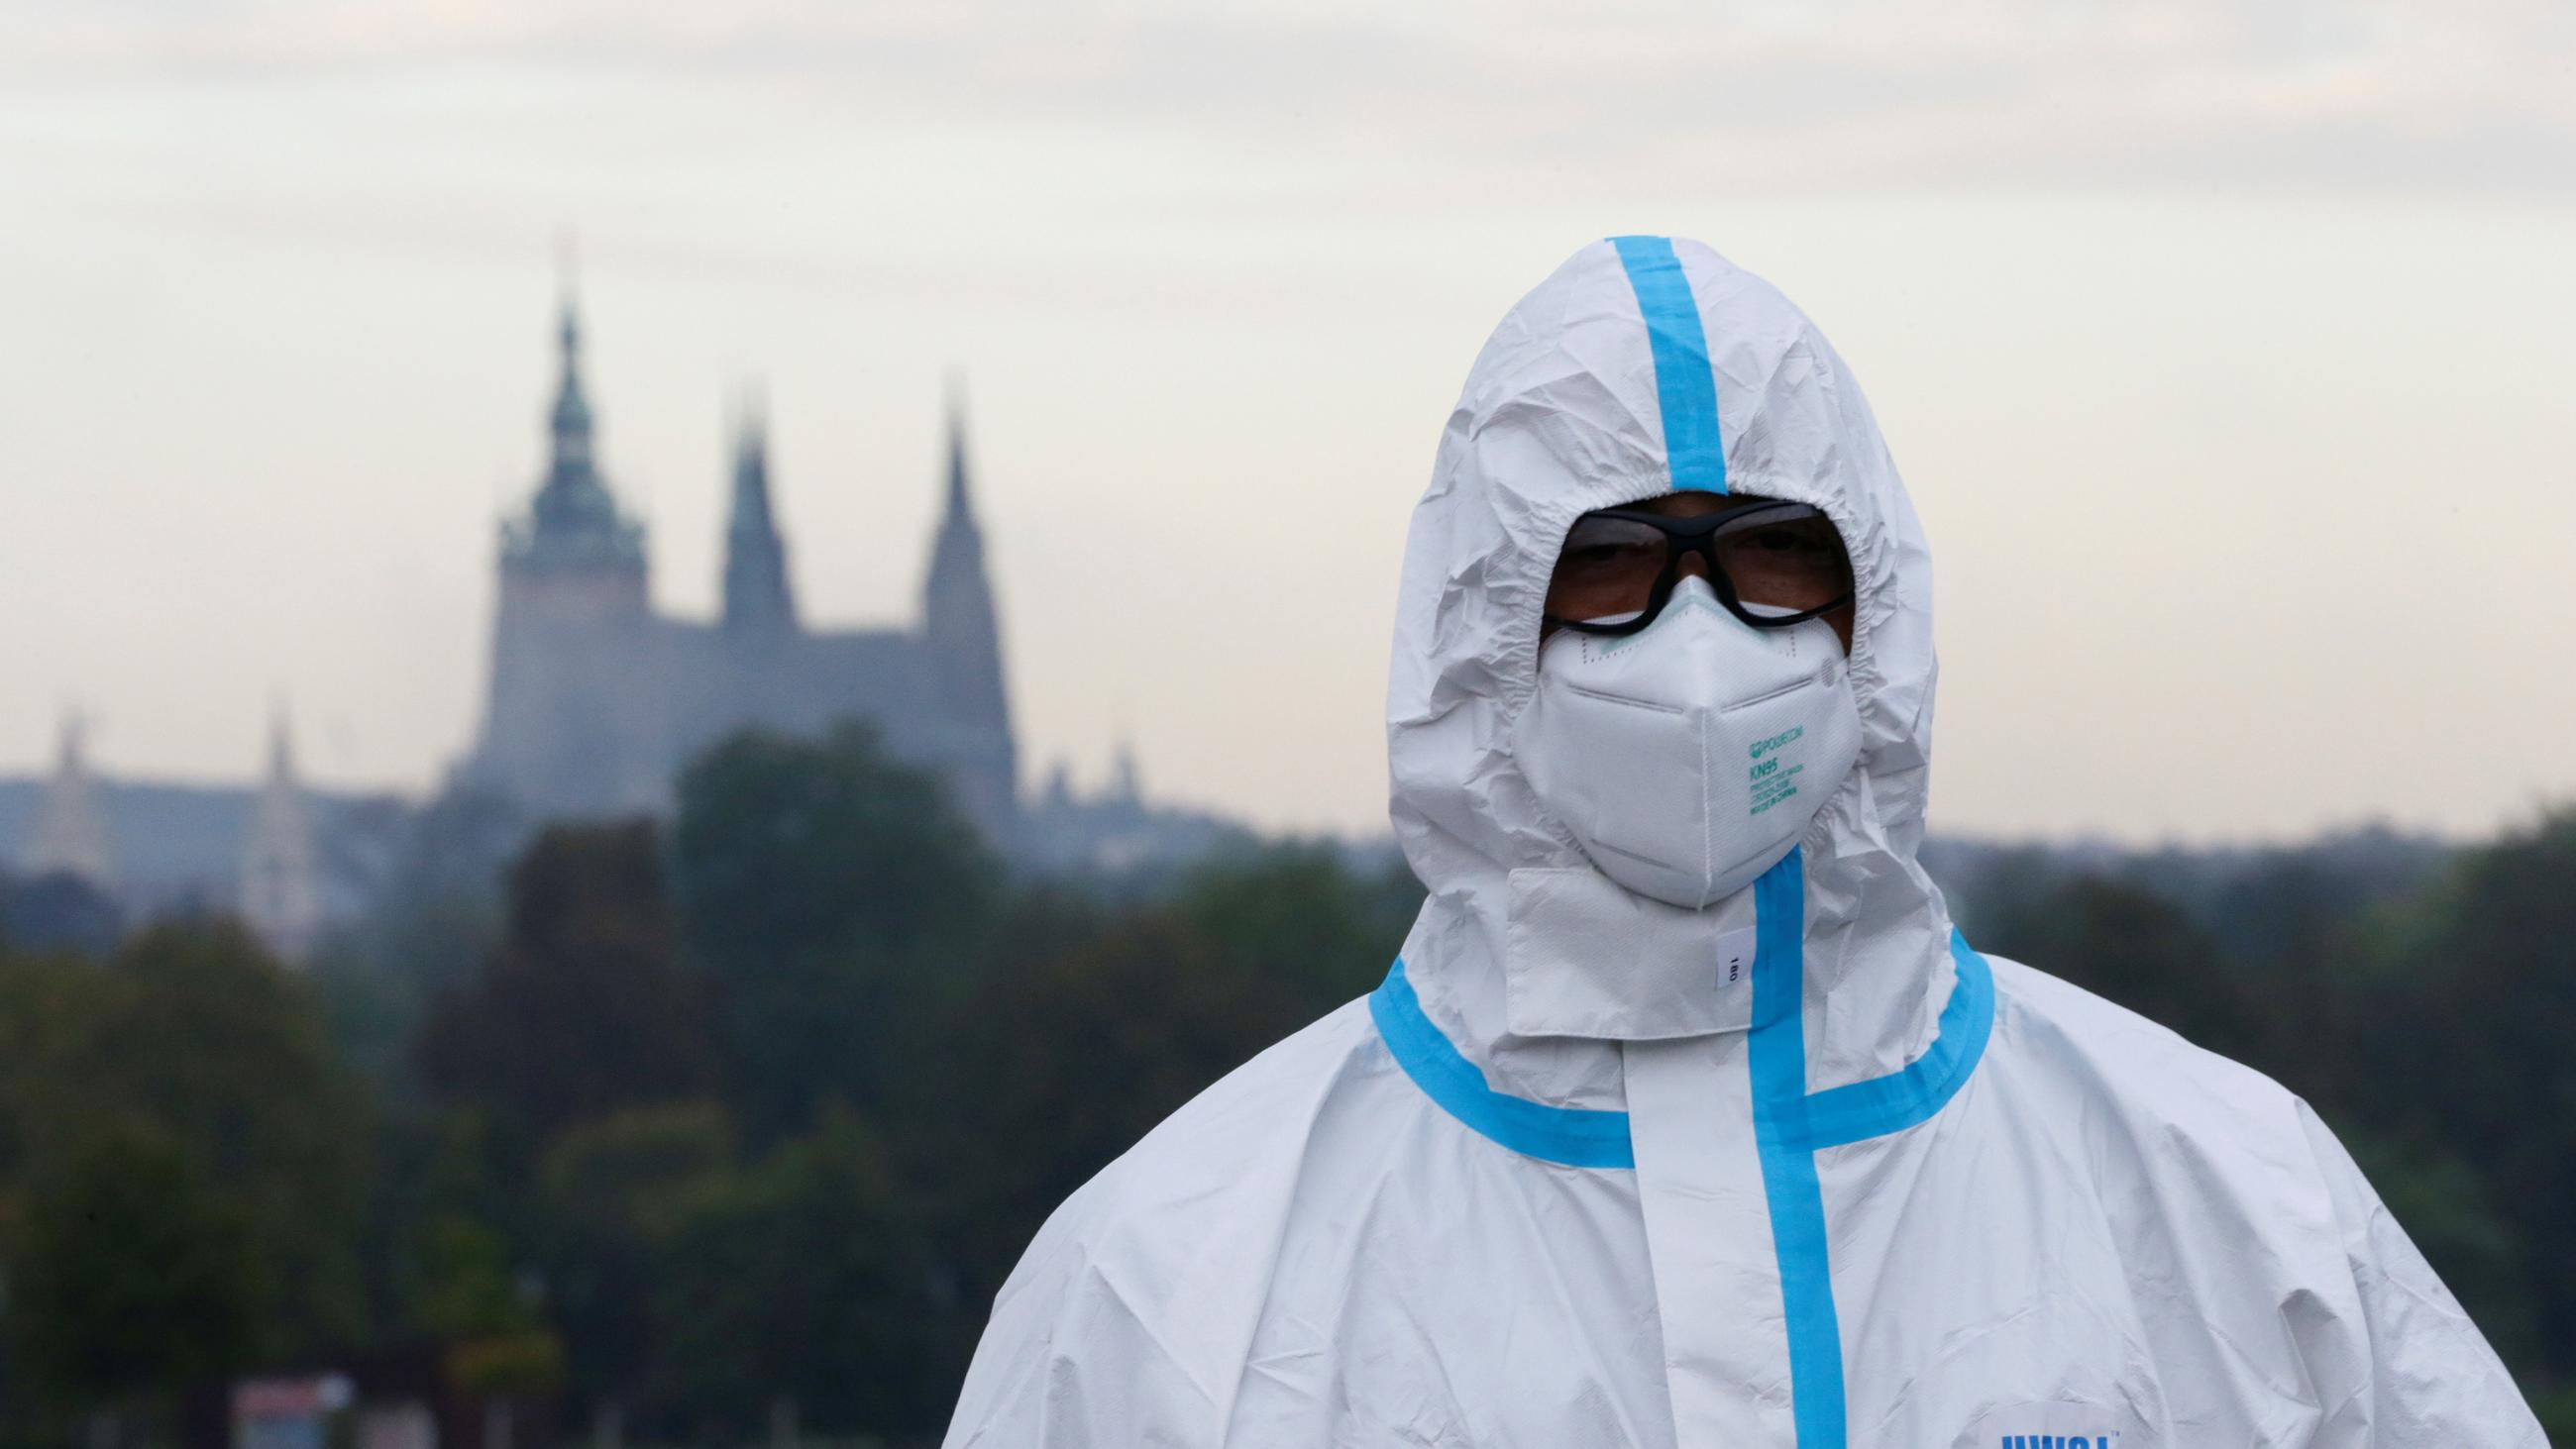 An election committee member wearing full PPE looks on while waiting for voters at a a drive-in polling station ahead of the country's regional election in Prague, Czech Republic. A castle can be seen in the background.